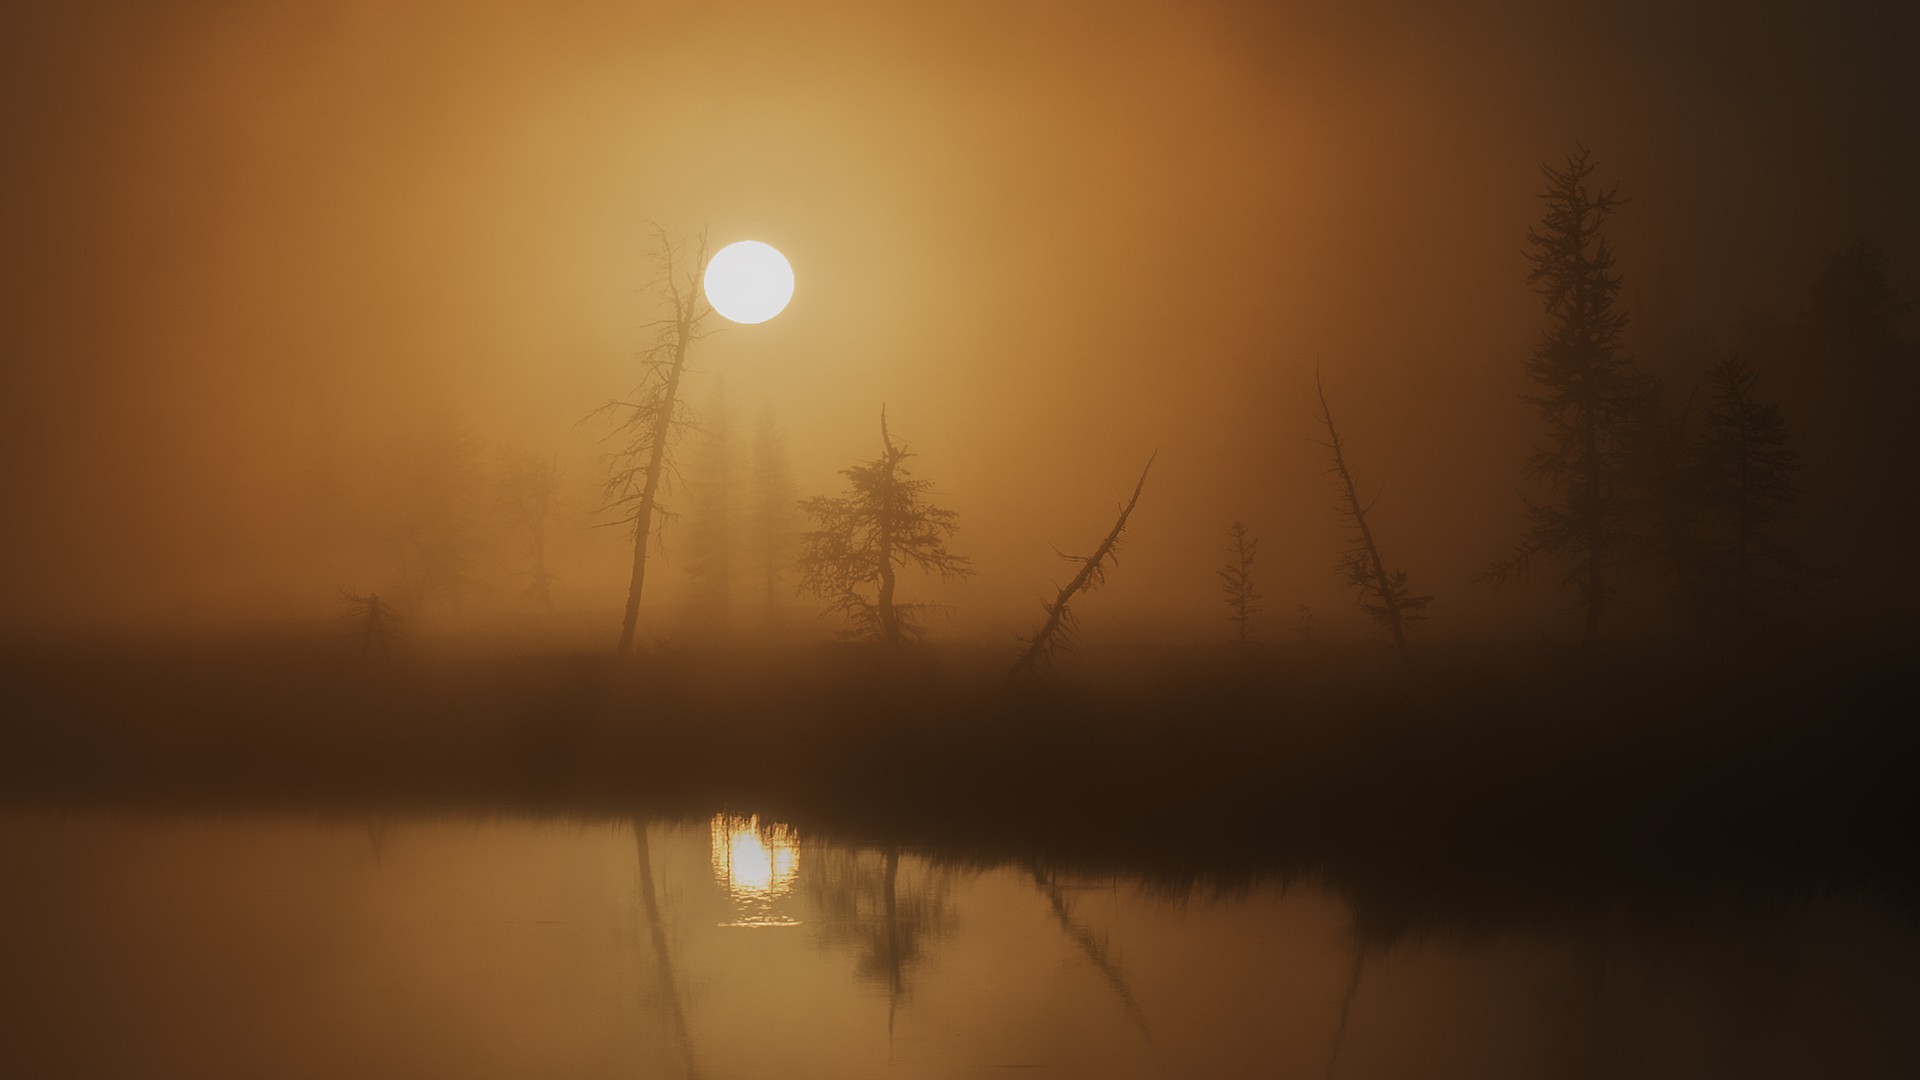 nature, Landscape, Trees, Mist, Blurred, Sun, Water, Lake, Reflection, Silhouette Wallpaper